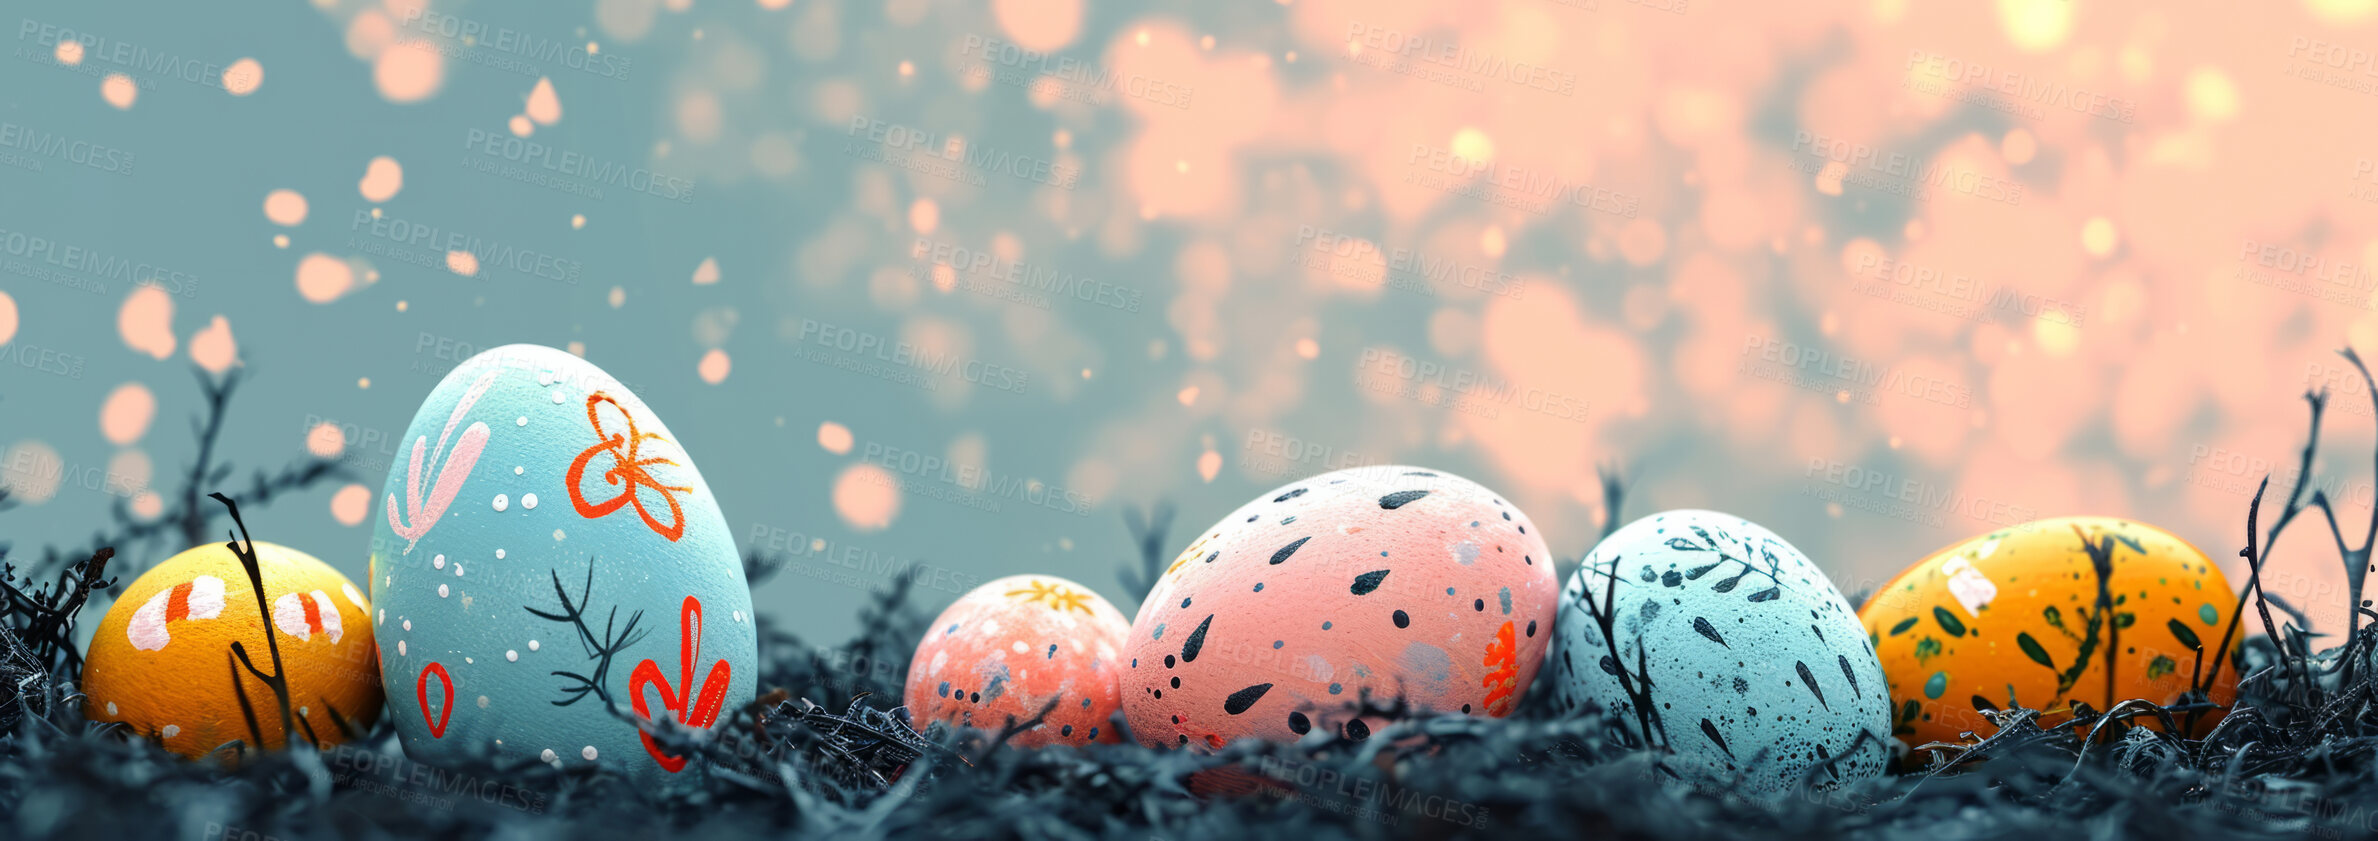 Buy stock photo Background, eggs and color for holiday, vacation and easter season with color, chocolate and celebration. Festive, banner and decoration in abstract for creative wallpaper, advertisement and art.